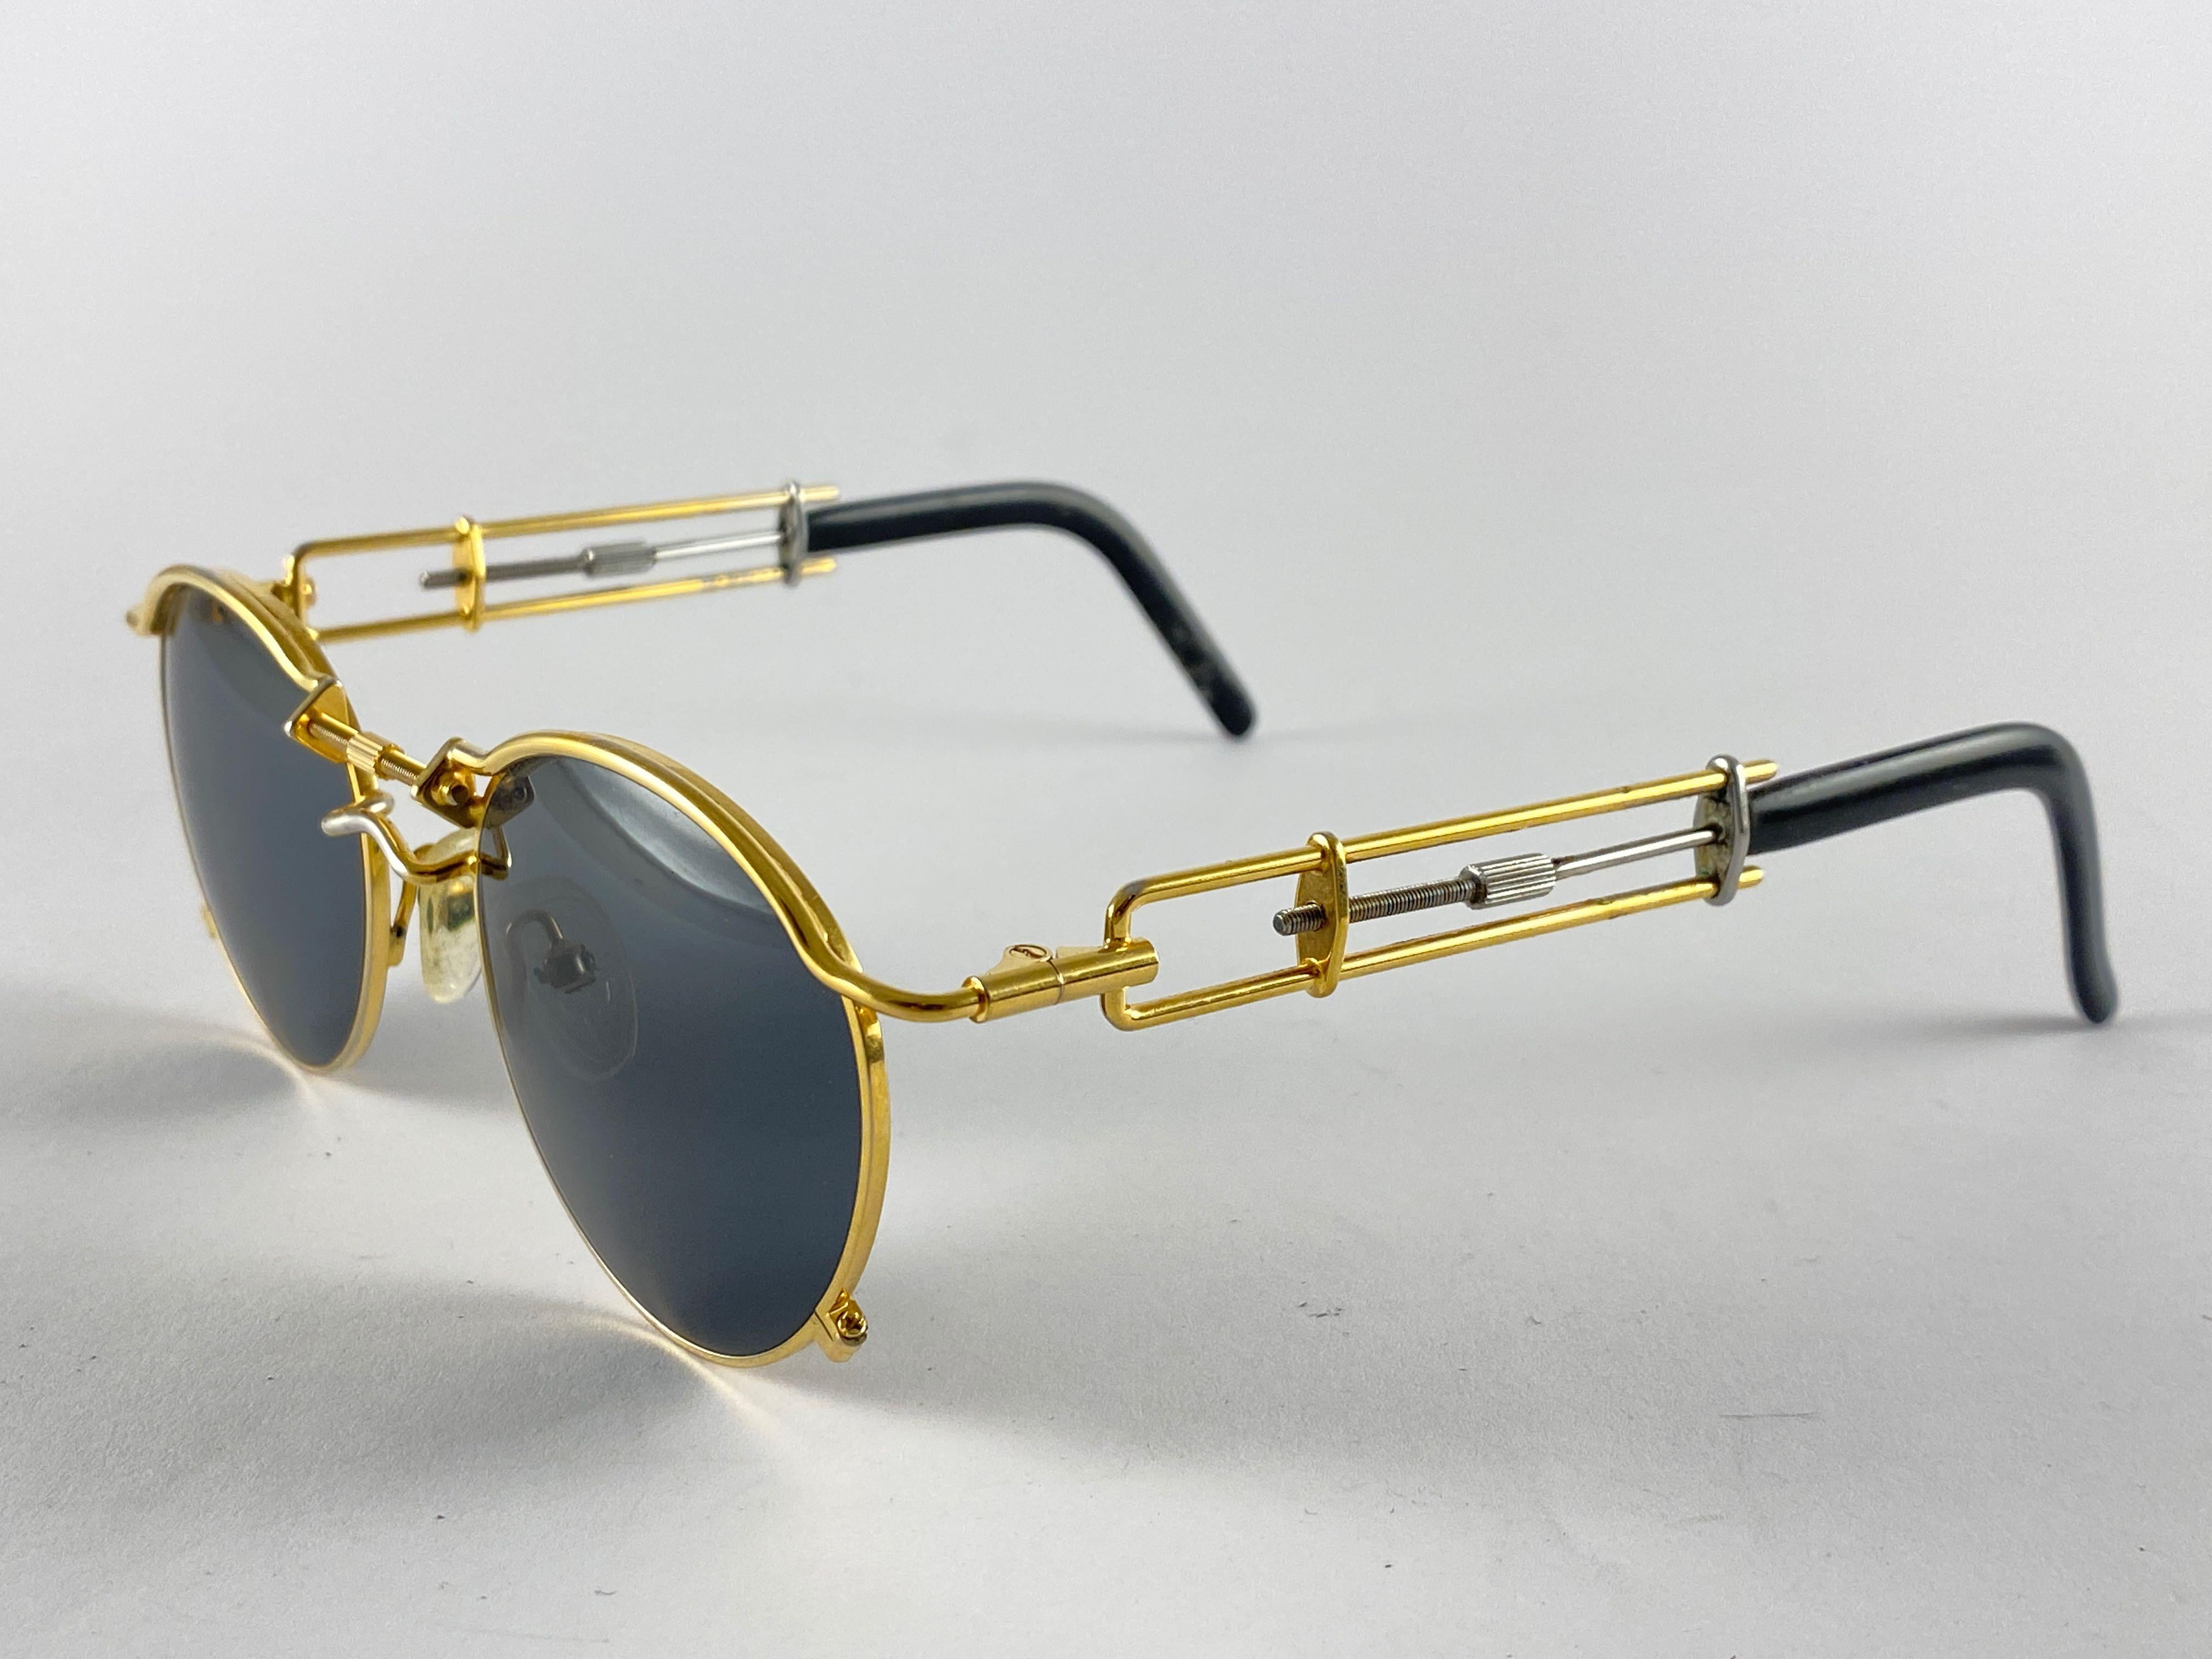 Mint Vintage Jean Paul Gaultier 56 0174 Gold & Silver 1990's Sunglasses Japan In Excellent Condition For Sale In Baleares, Baleares